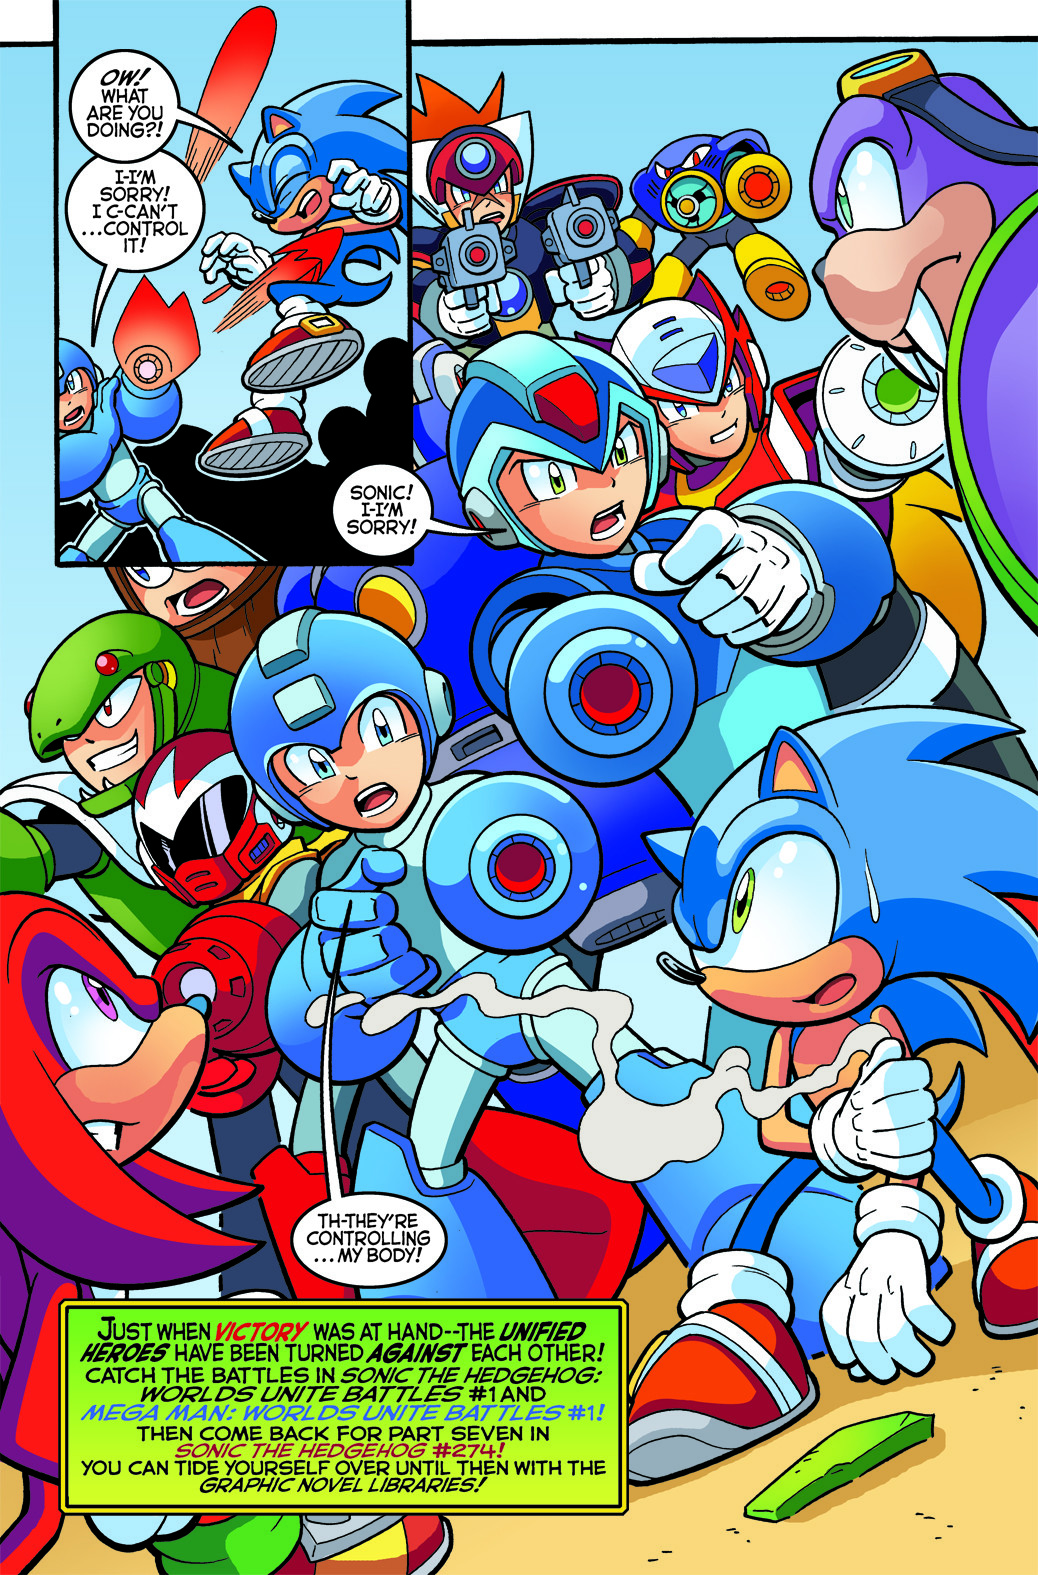 SONIC BOOM - #9, page 20